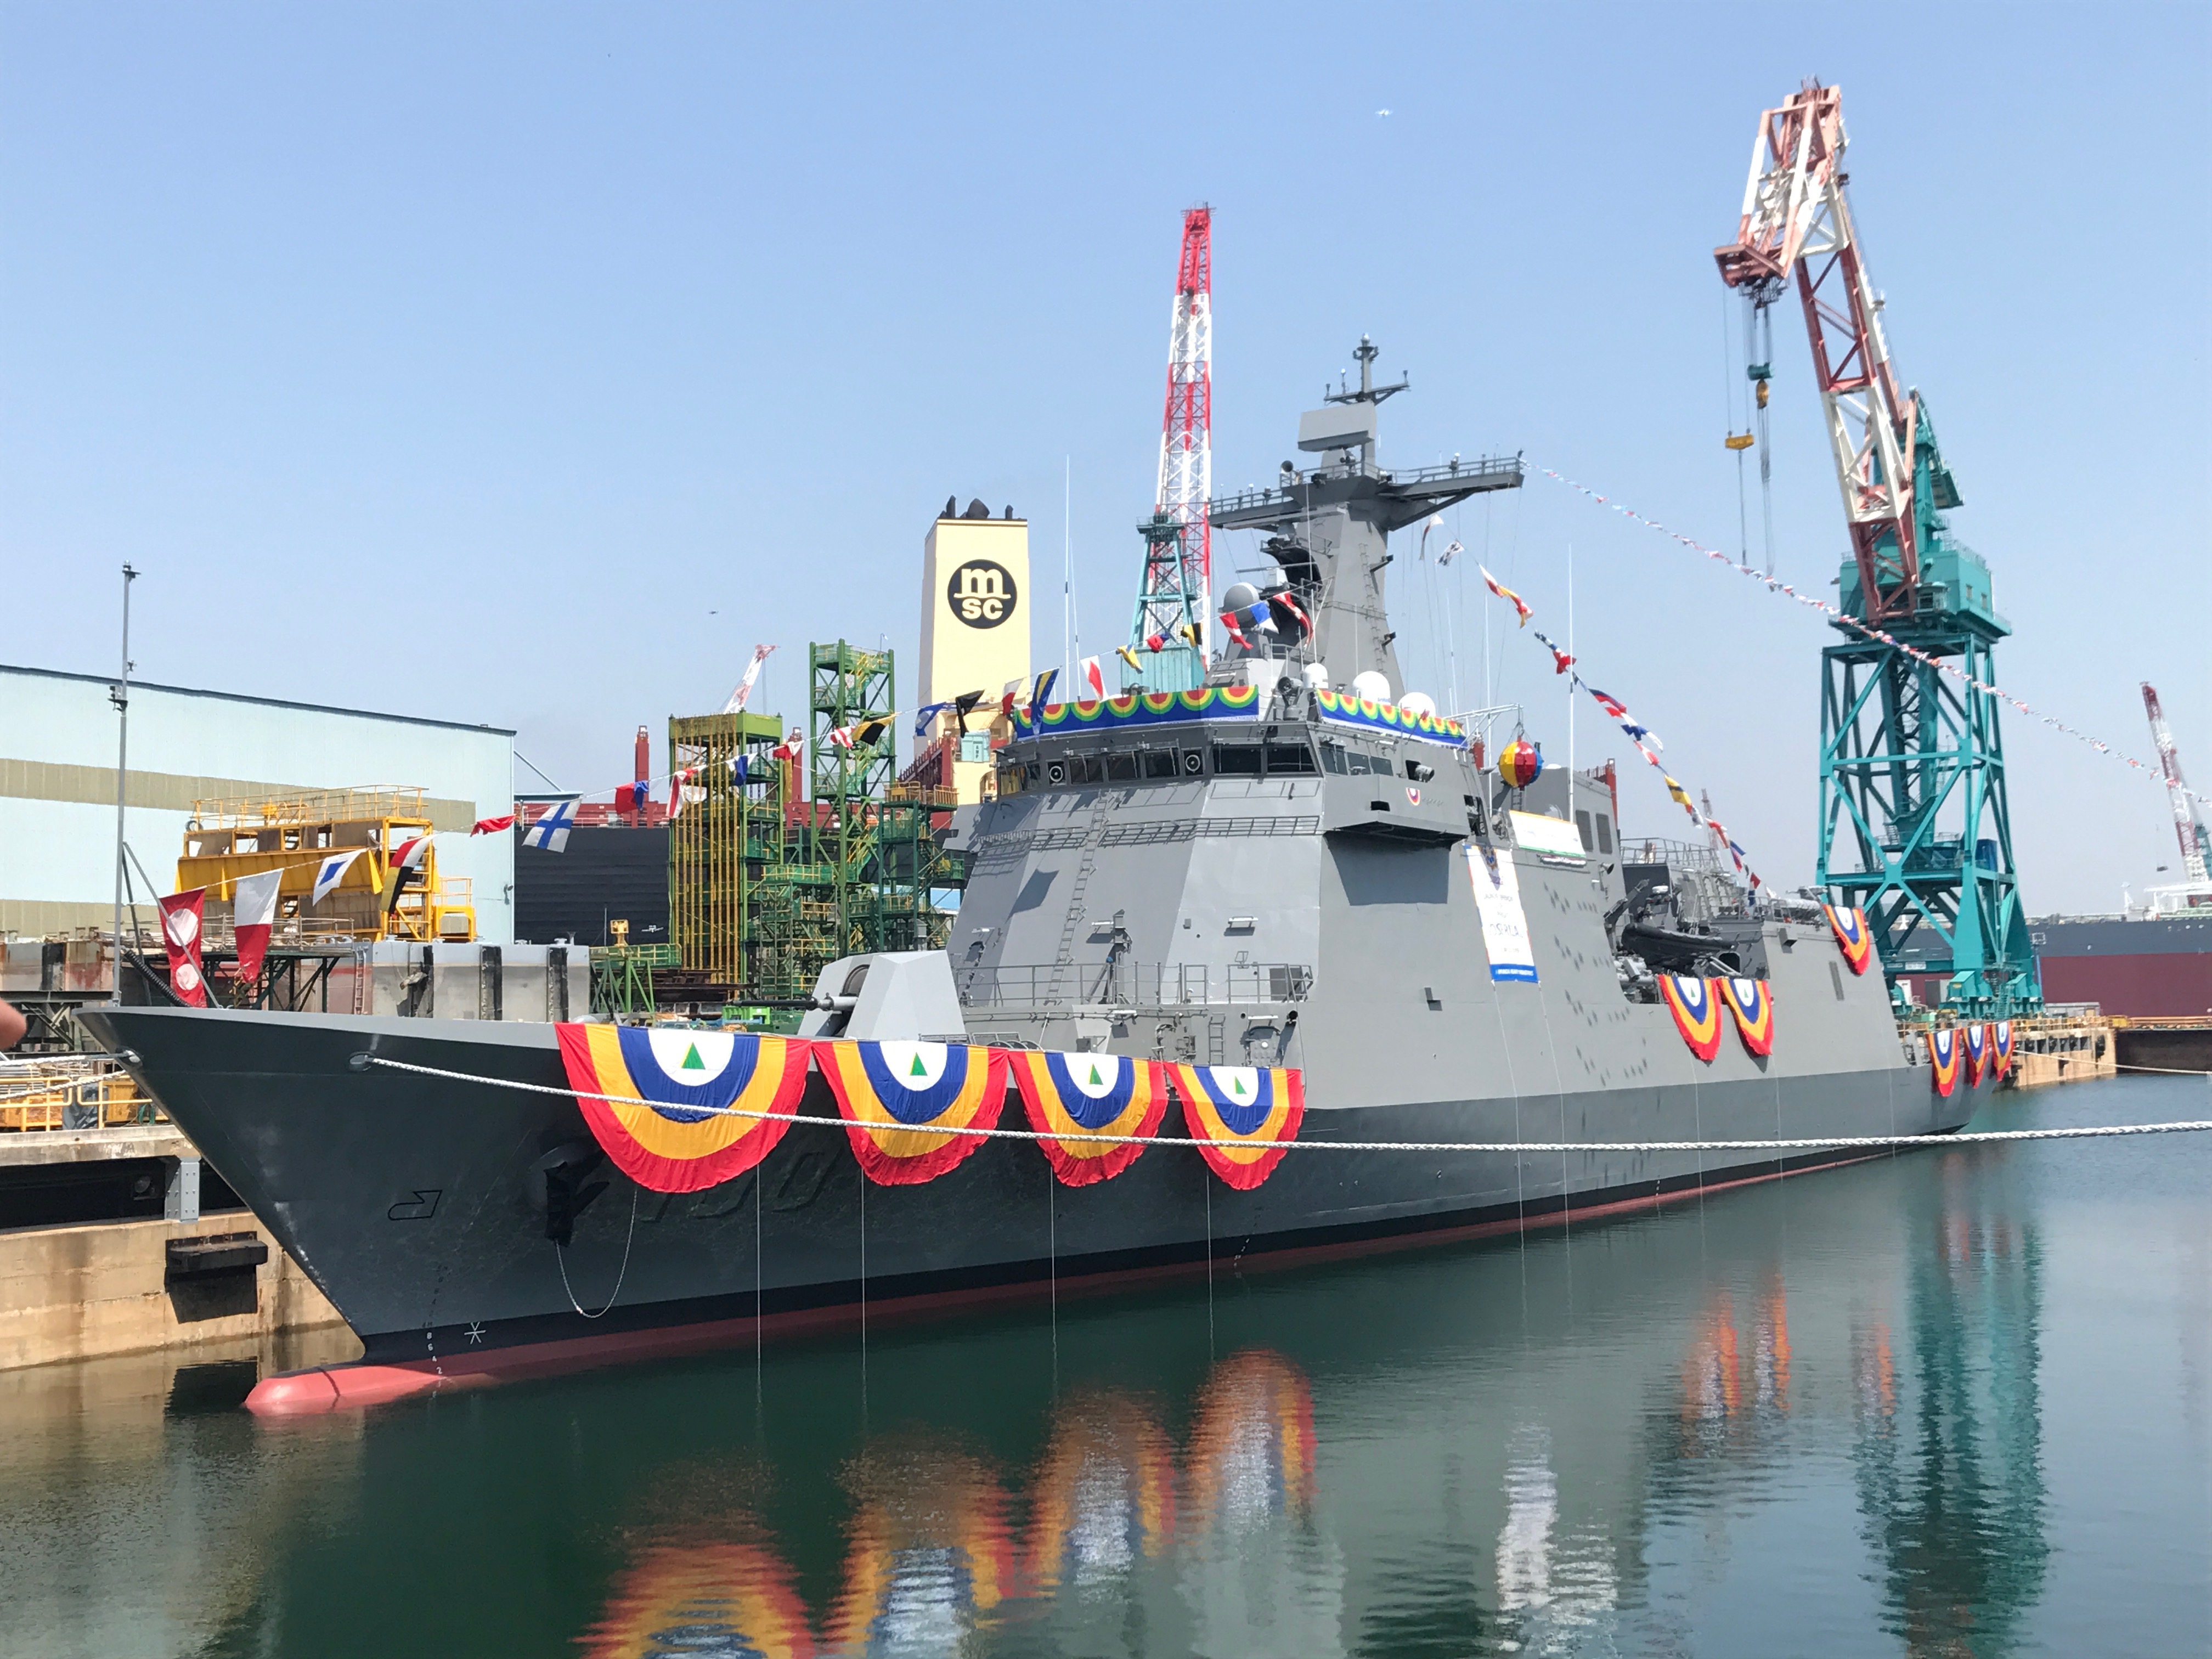 BRP Jose Rizal is the first brand new Philippine Navy ship capable of anti-warfare, anti-surface warfare, anti-submarine warfare and electronic warfare operations. Image: Frances Mangonsing/Inquirer